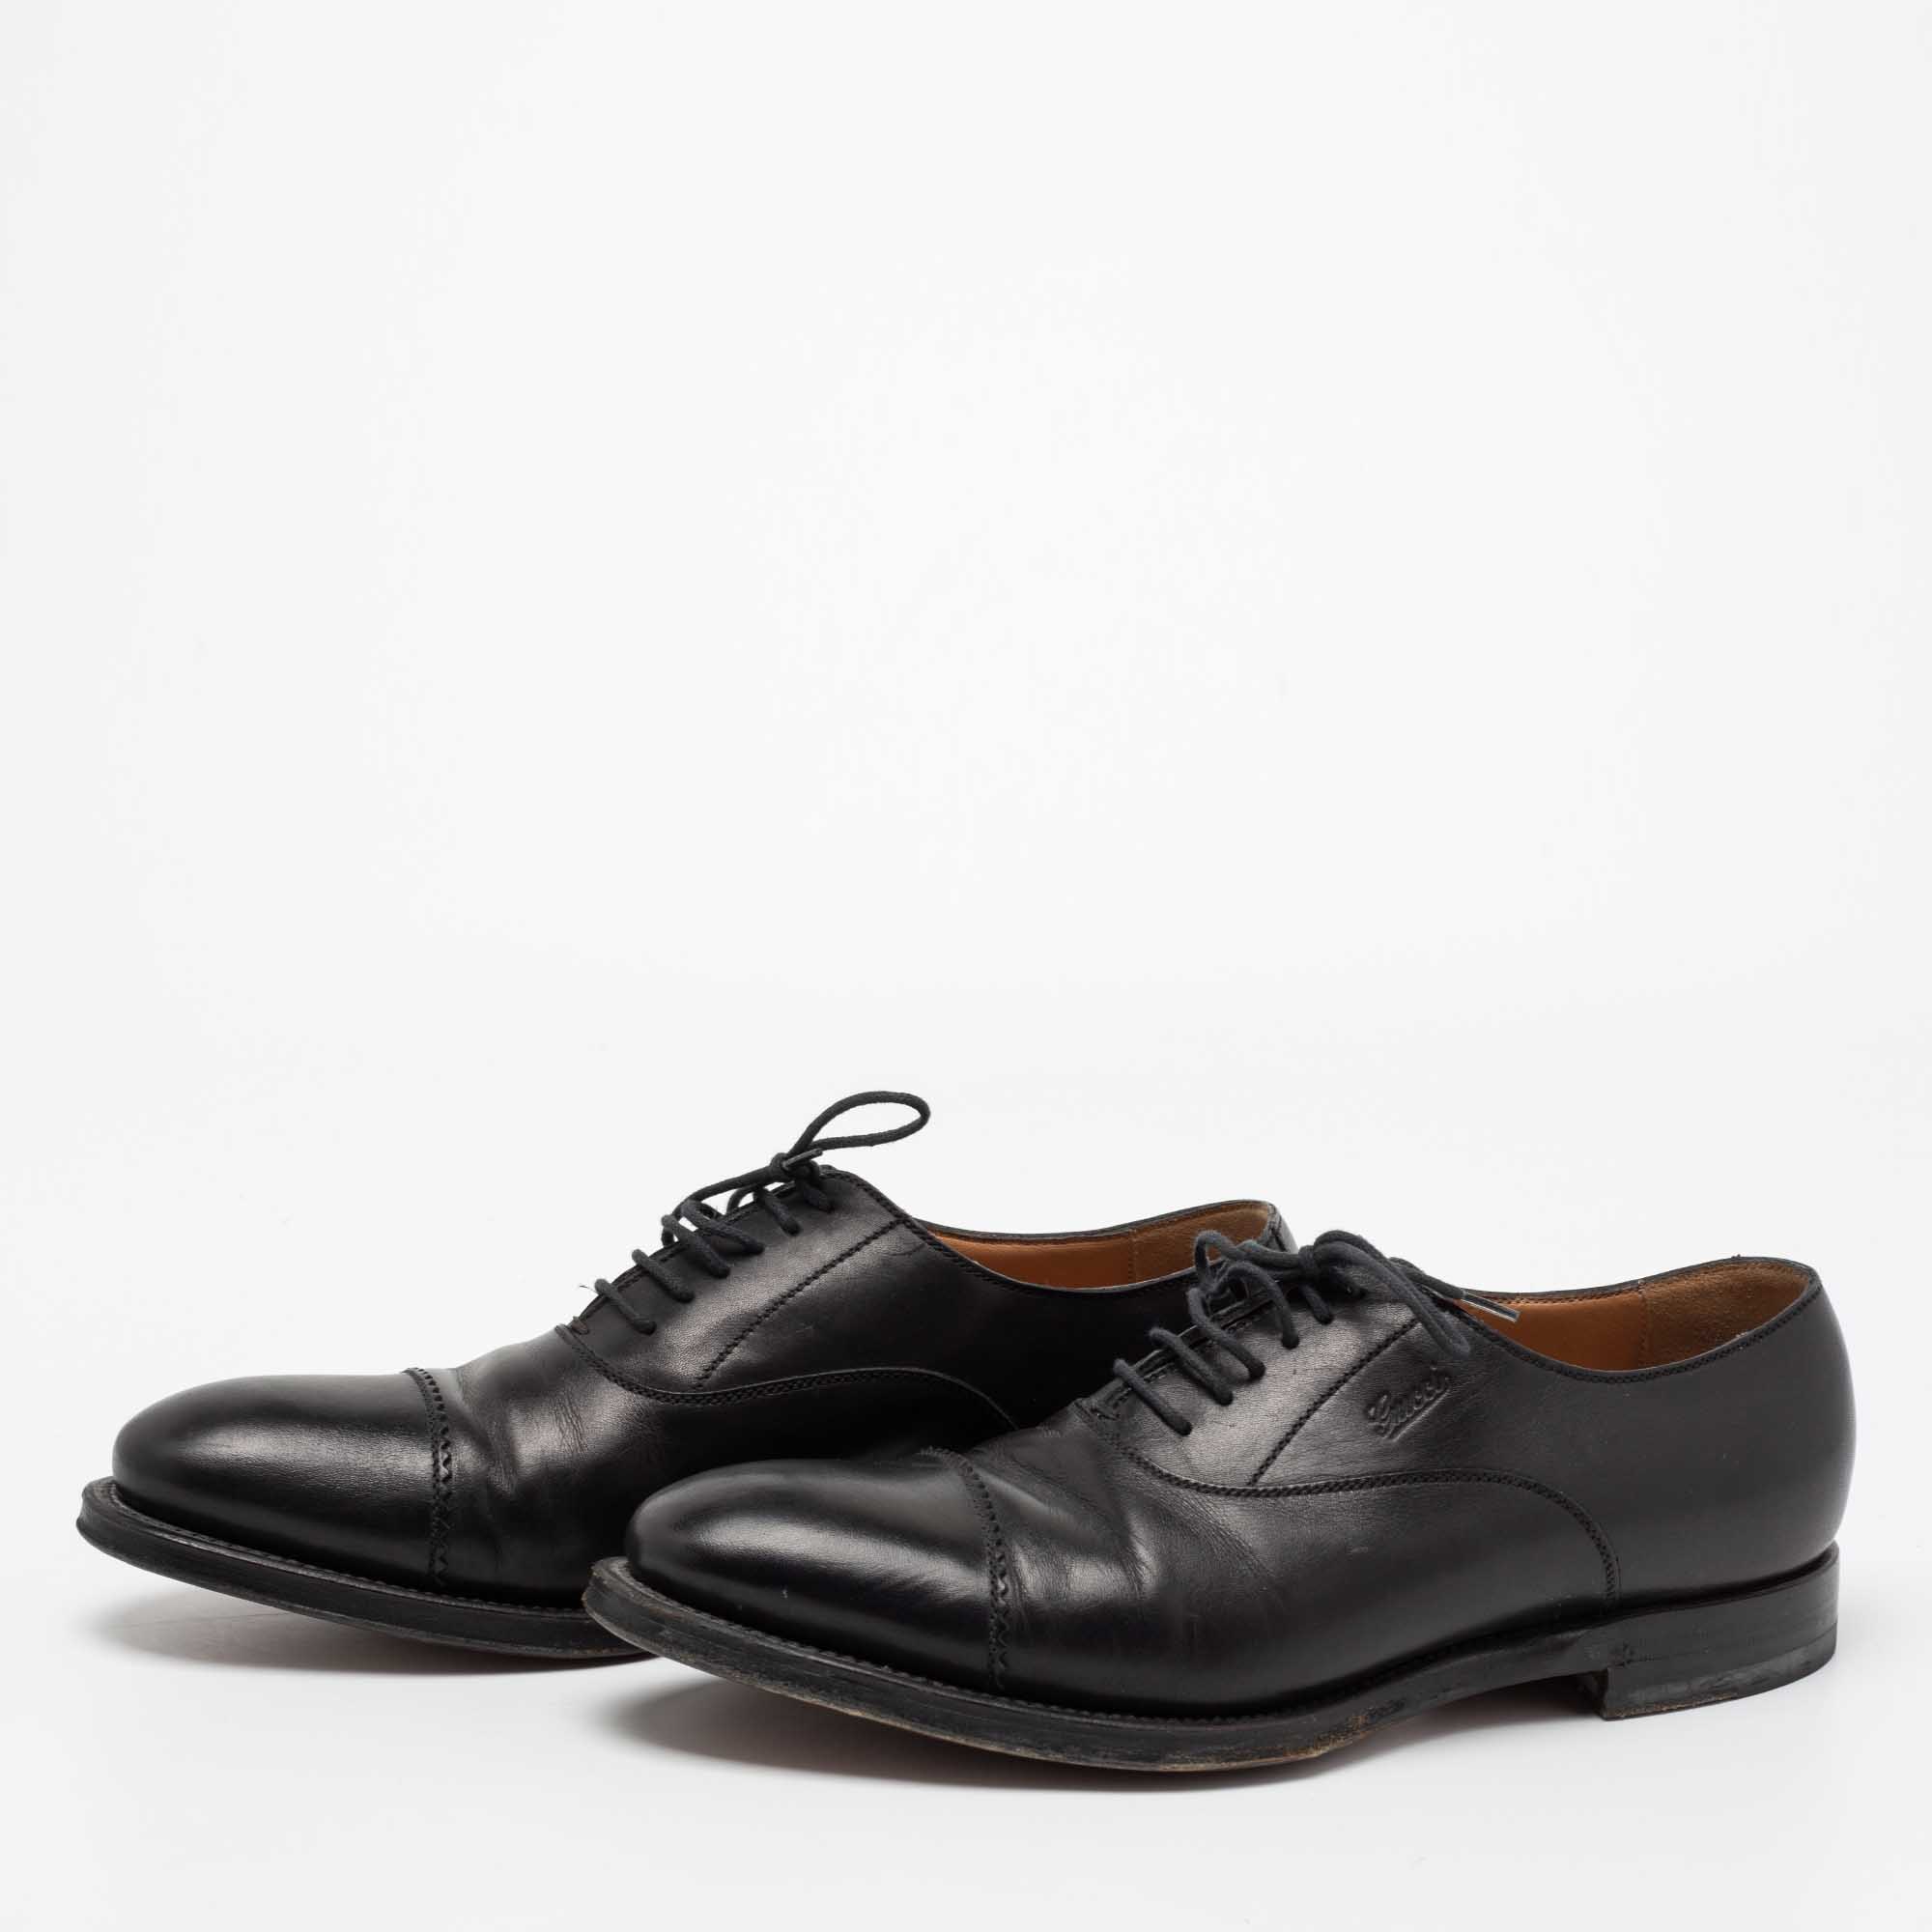 

Gucci Black Leather Lace-Up Oxfords Size